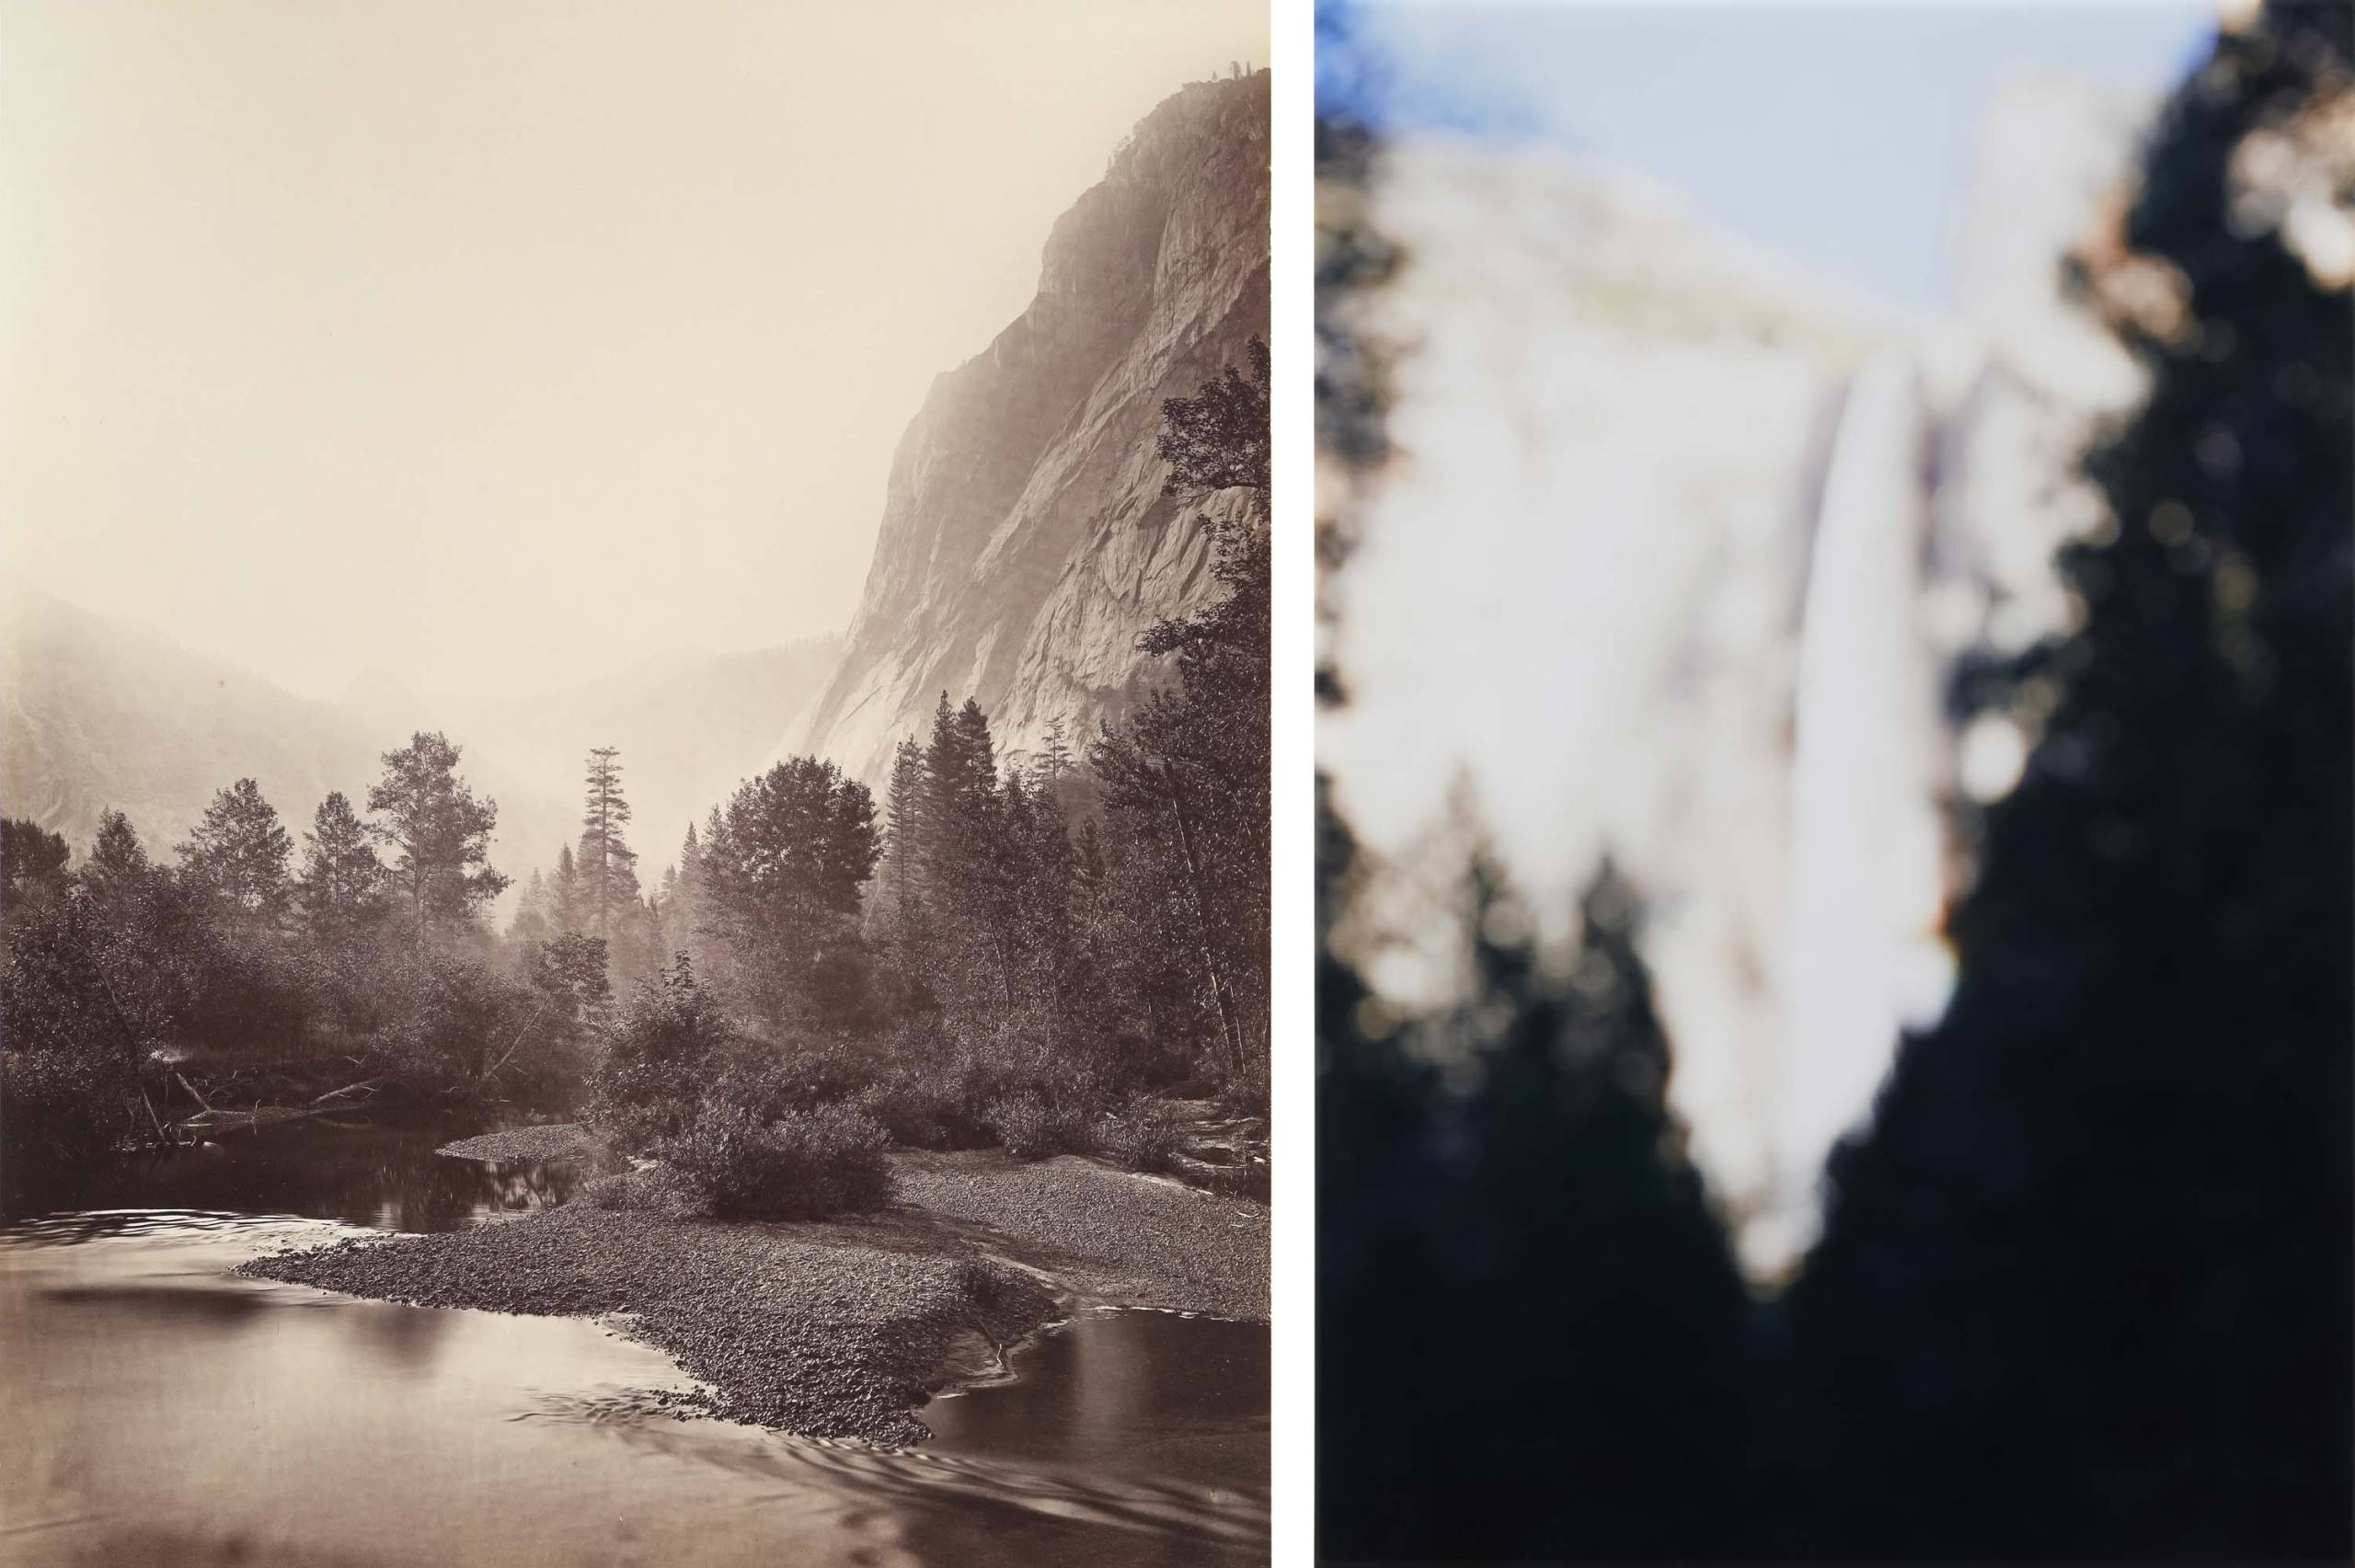 Composite images of two vertical of Yosemite, left in focus, right out of focus